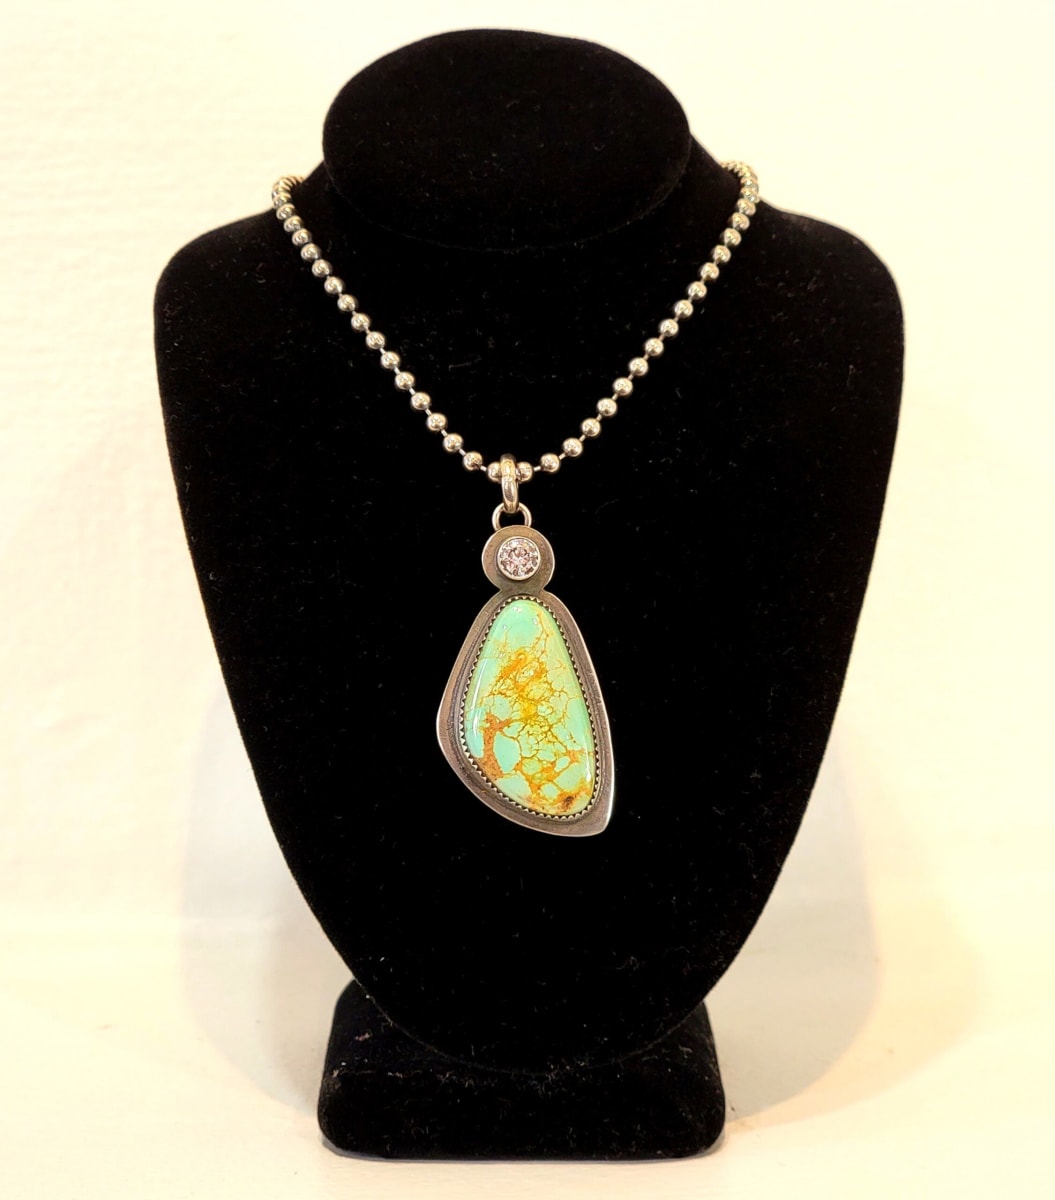 "Growth Spell Necklace" - Minimalist Vintage Sage Green Turquoise in Sawtooth Bezel and Cubic Zirconia Pendant on Bead Ball Chain by Shasta Brooks  Image: All Art © Shasta Brooks Studio LLC